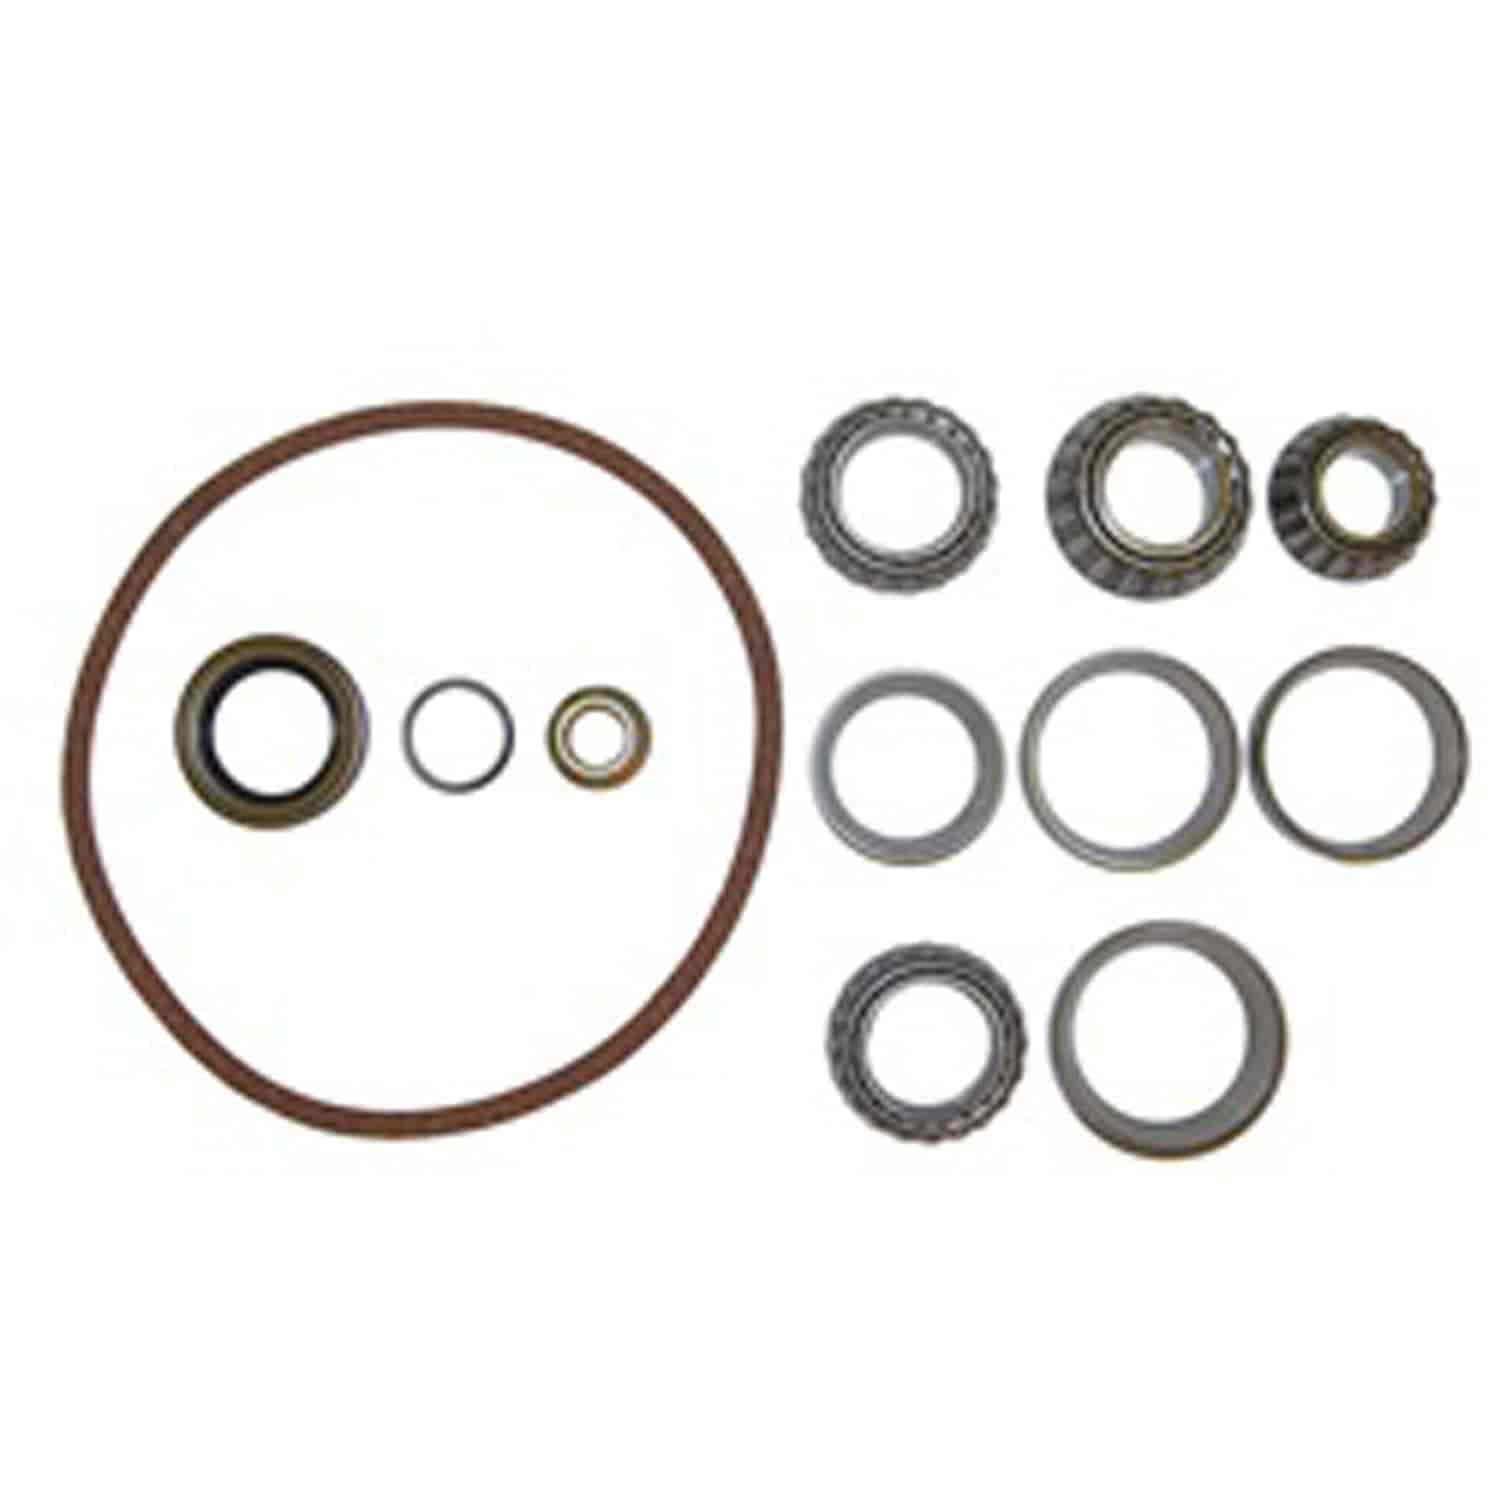 This differential rebuild kit from Omix-ADA fits AMC